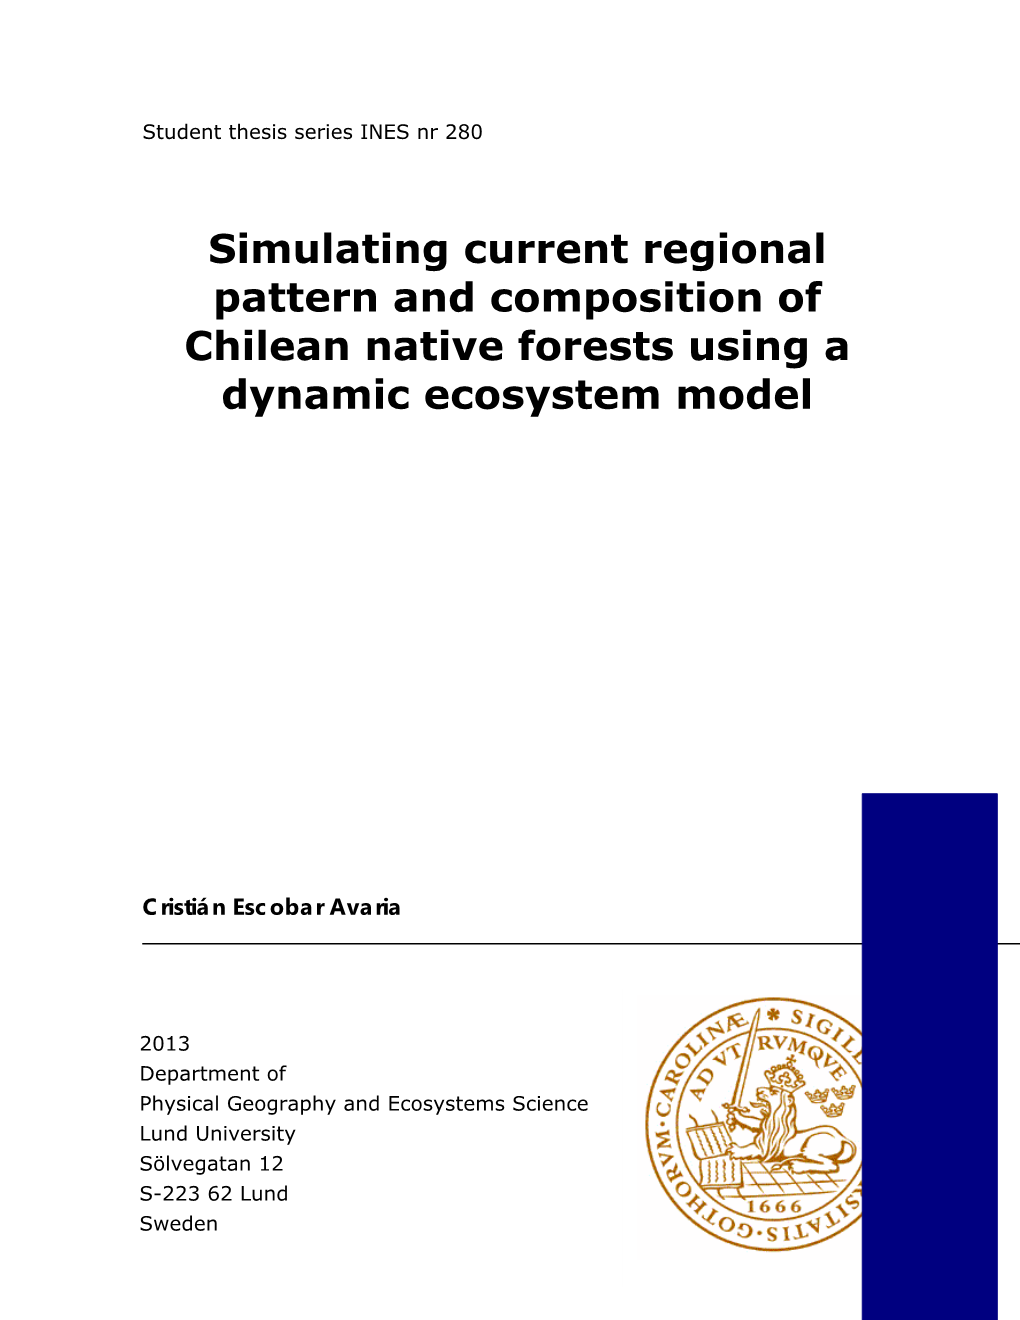 Simulating Current Regional Pattern and Composition of Chilean Native Forests Using a Dynamic Ecosystem Model